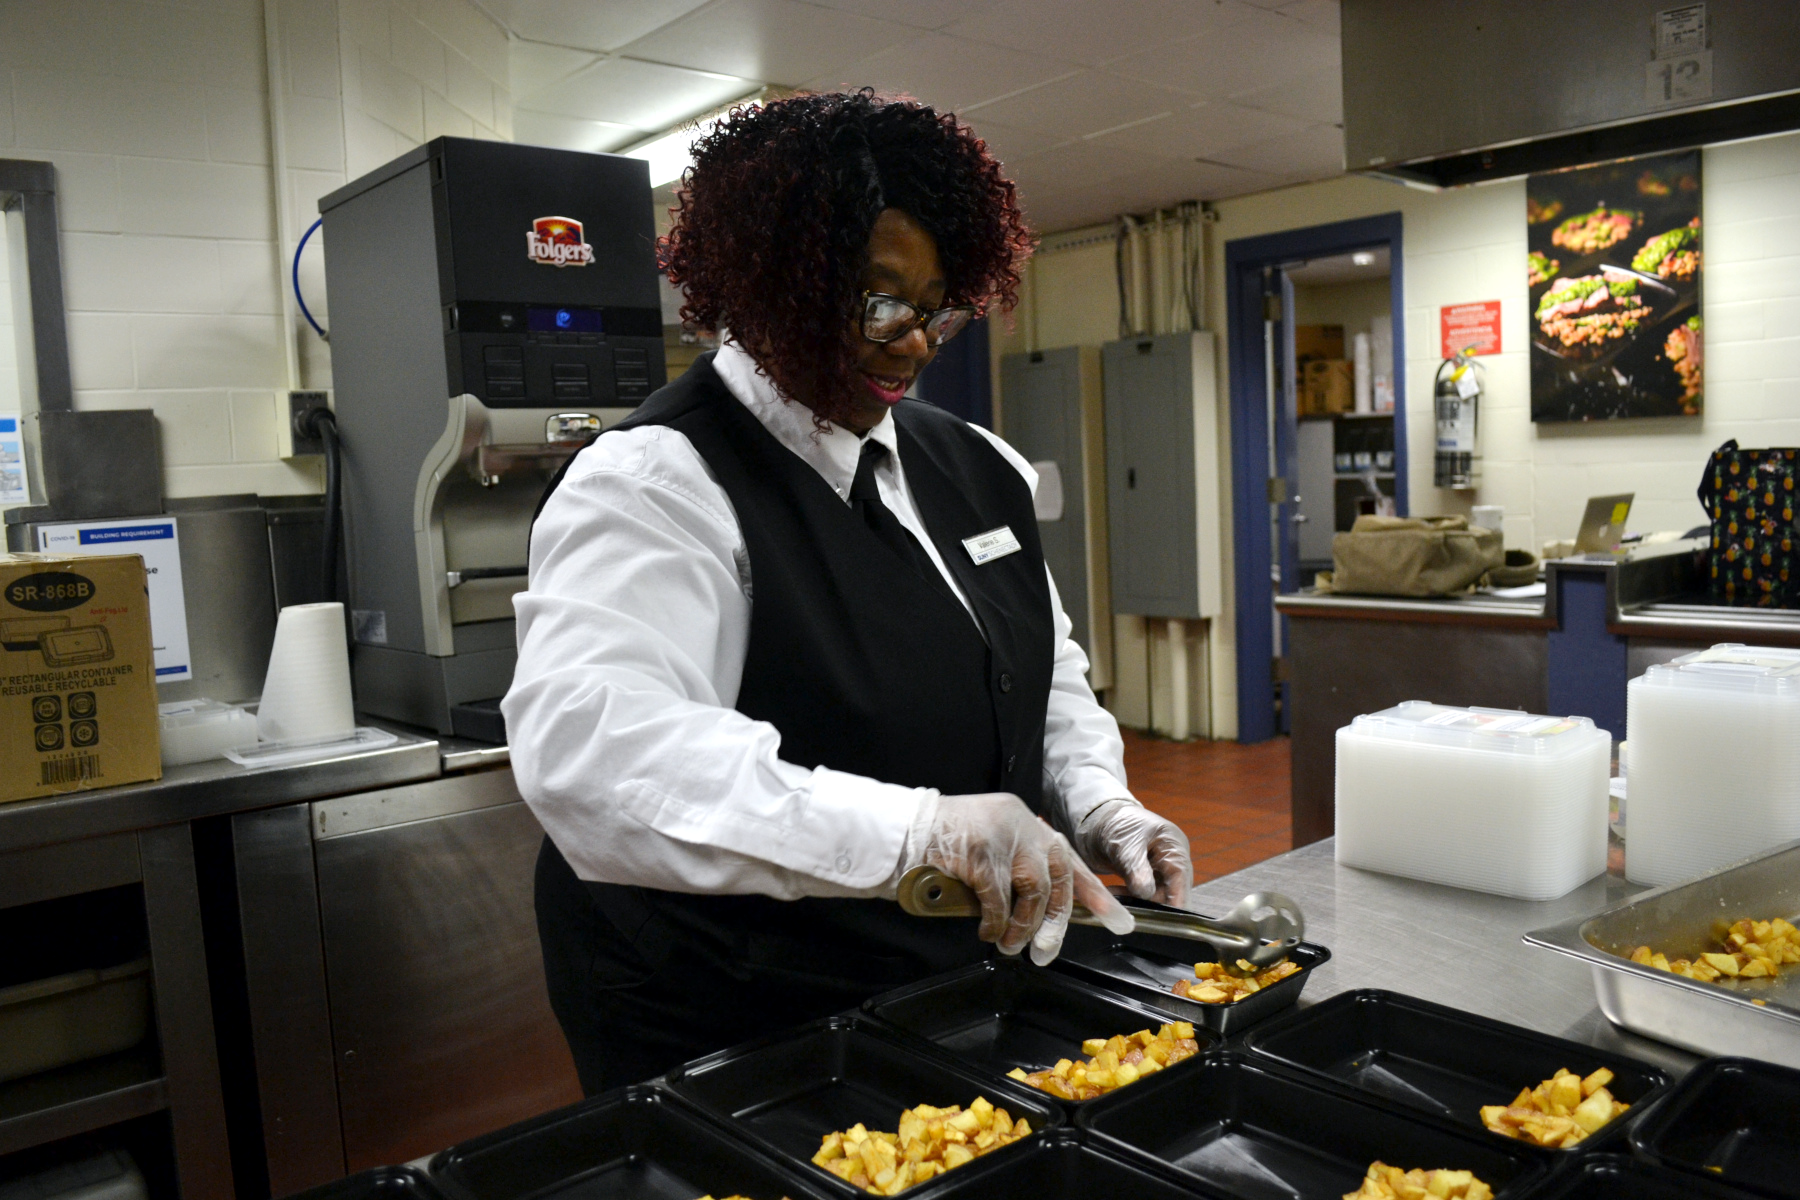 Valerie Smith in Culinary Lab, putting home fries in food container in 